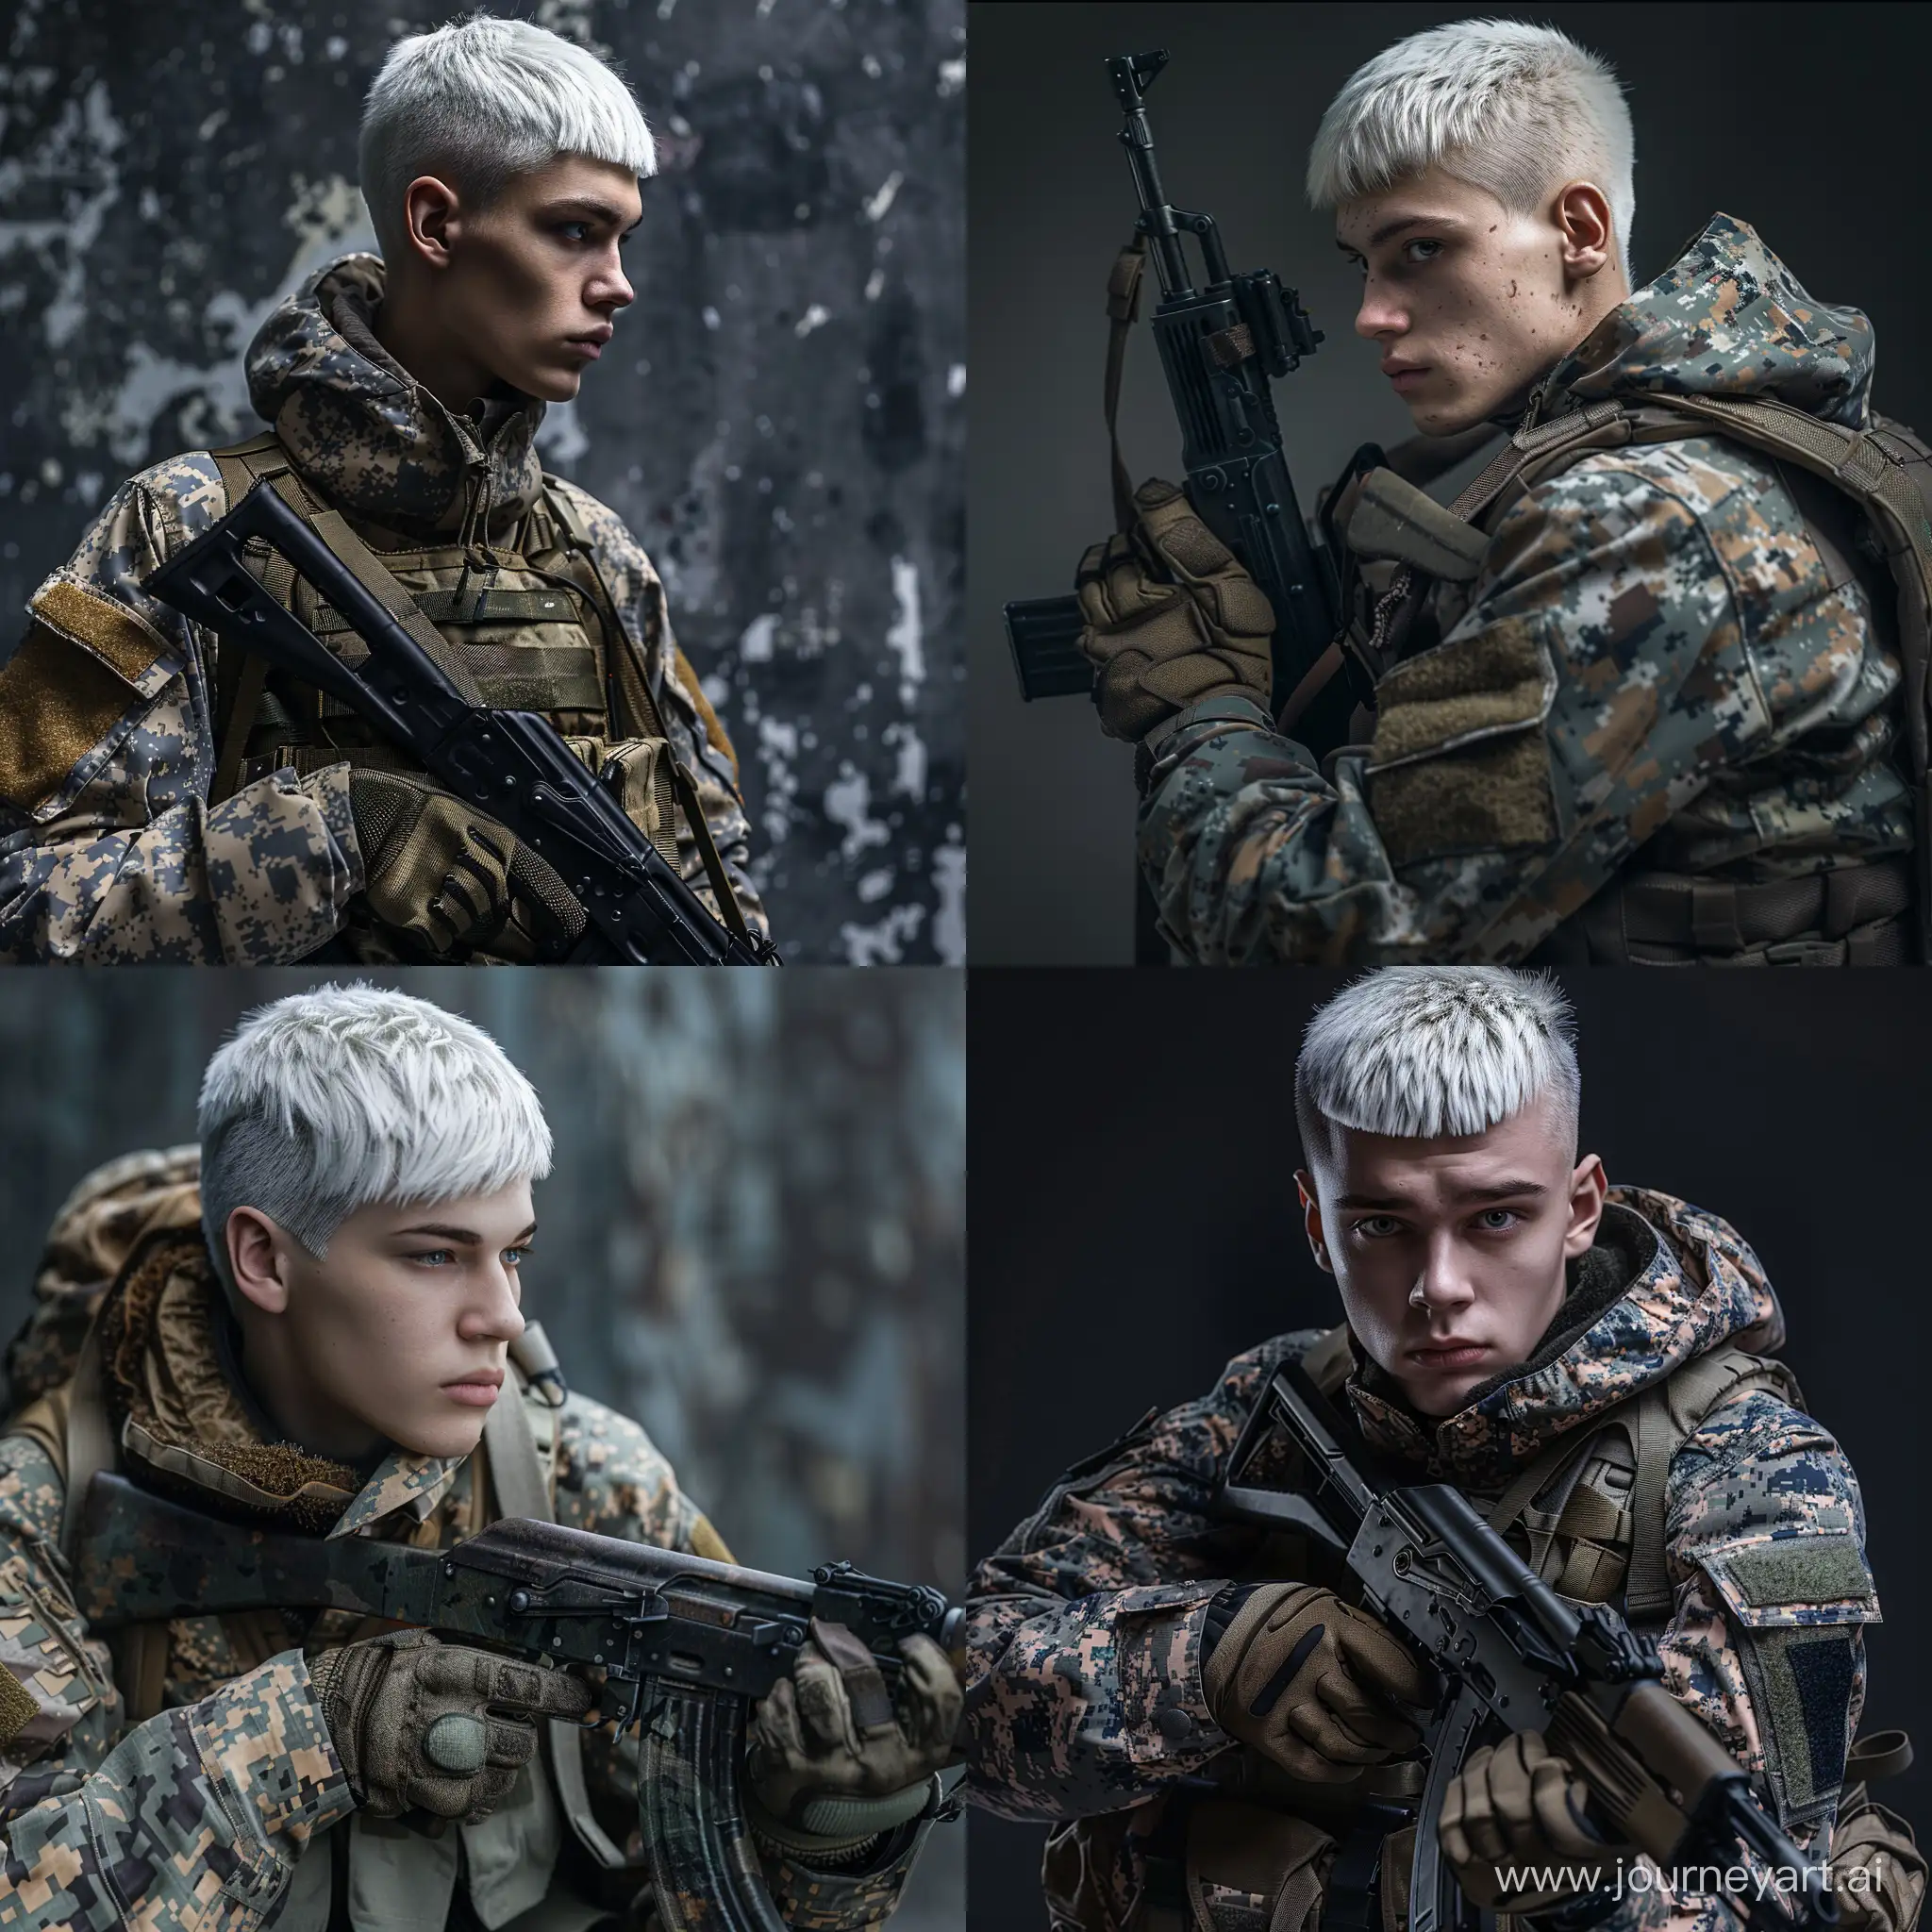 Young-Male-Soldier-in-Winter-Camouflage-Combat-Uniform-with-AK12